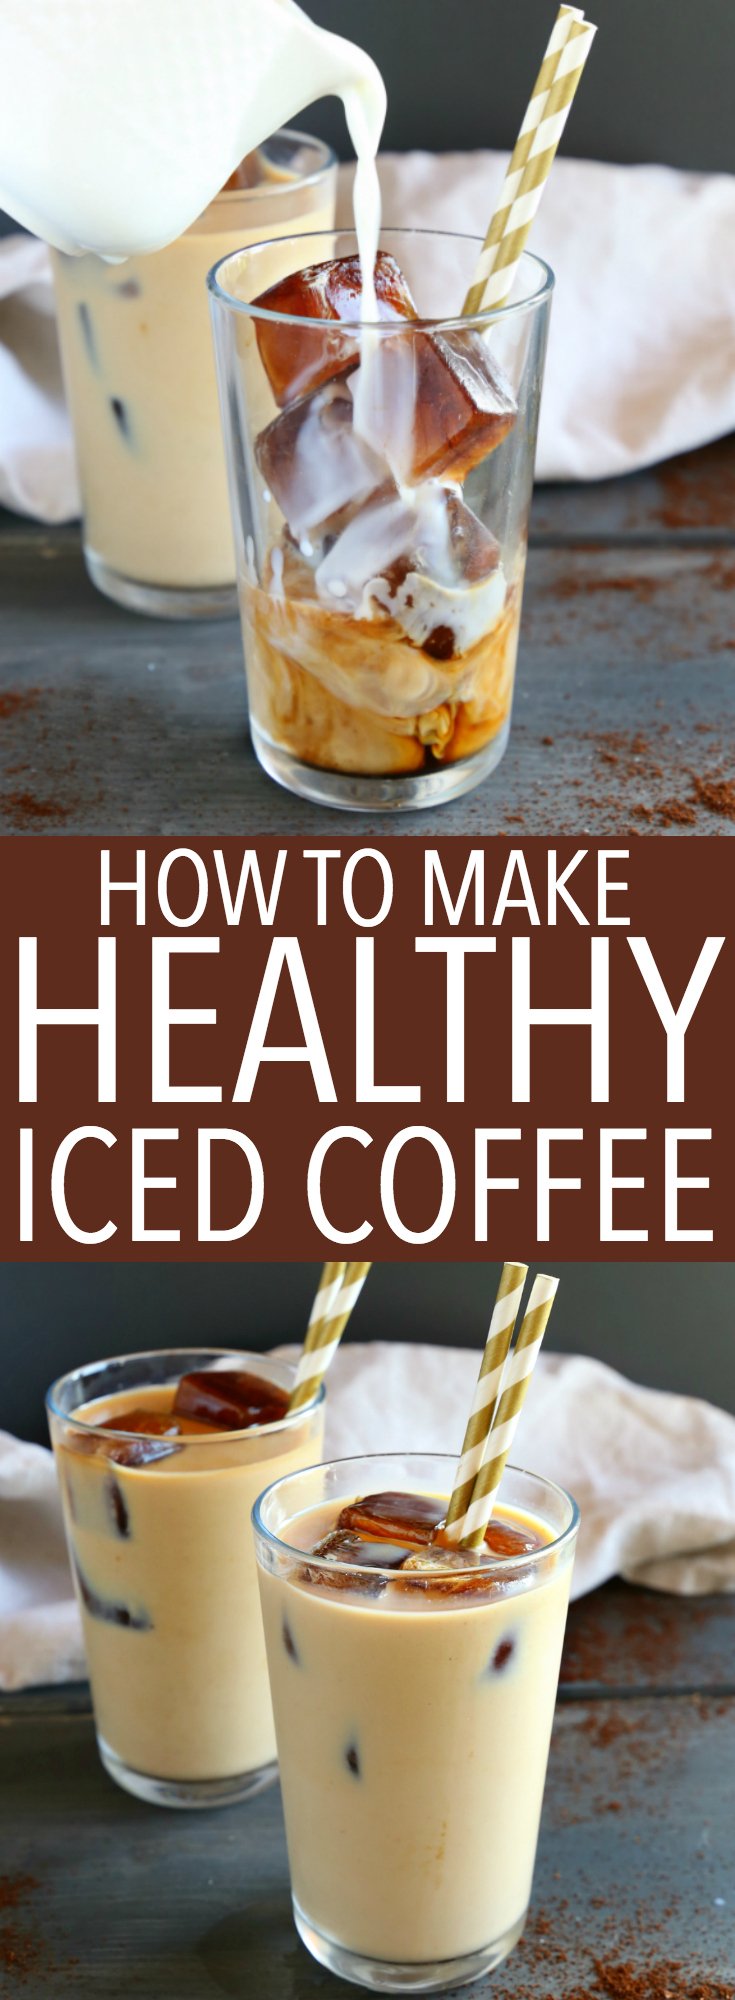 how to make iced coffee at home with instant coffee